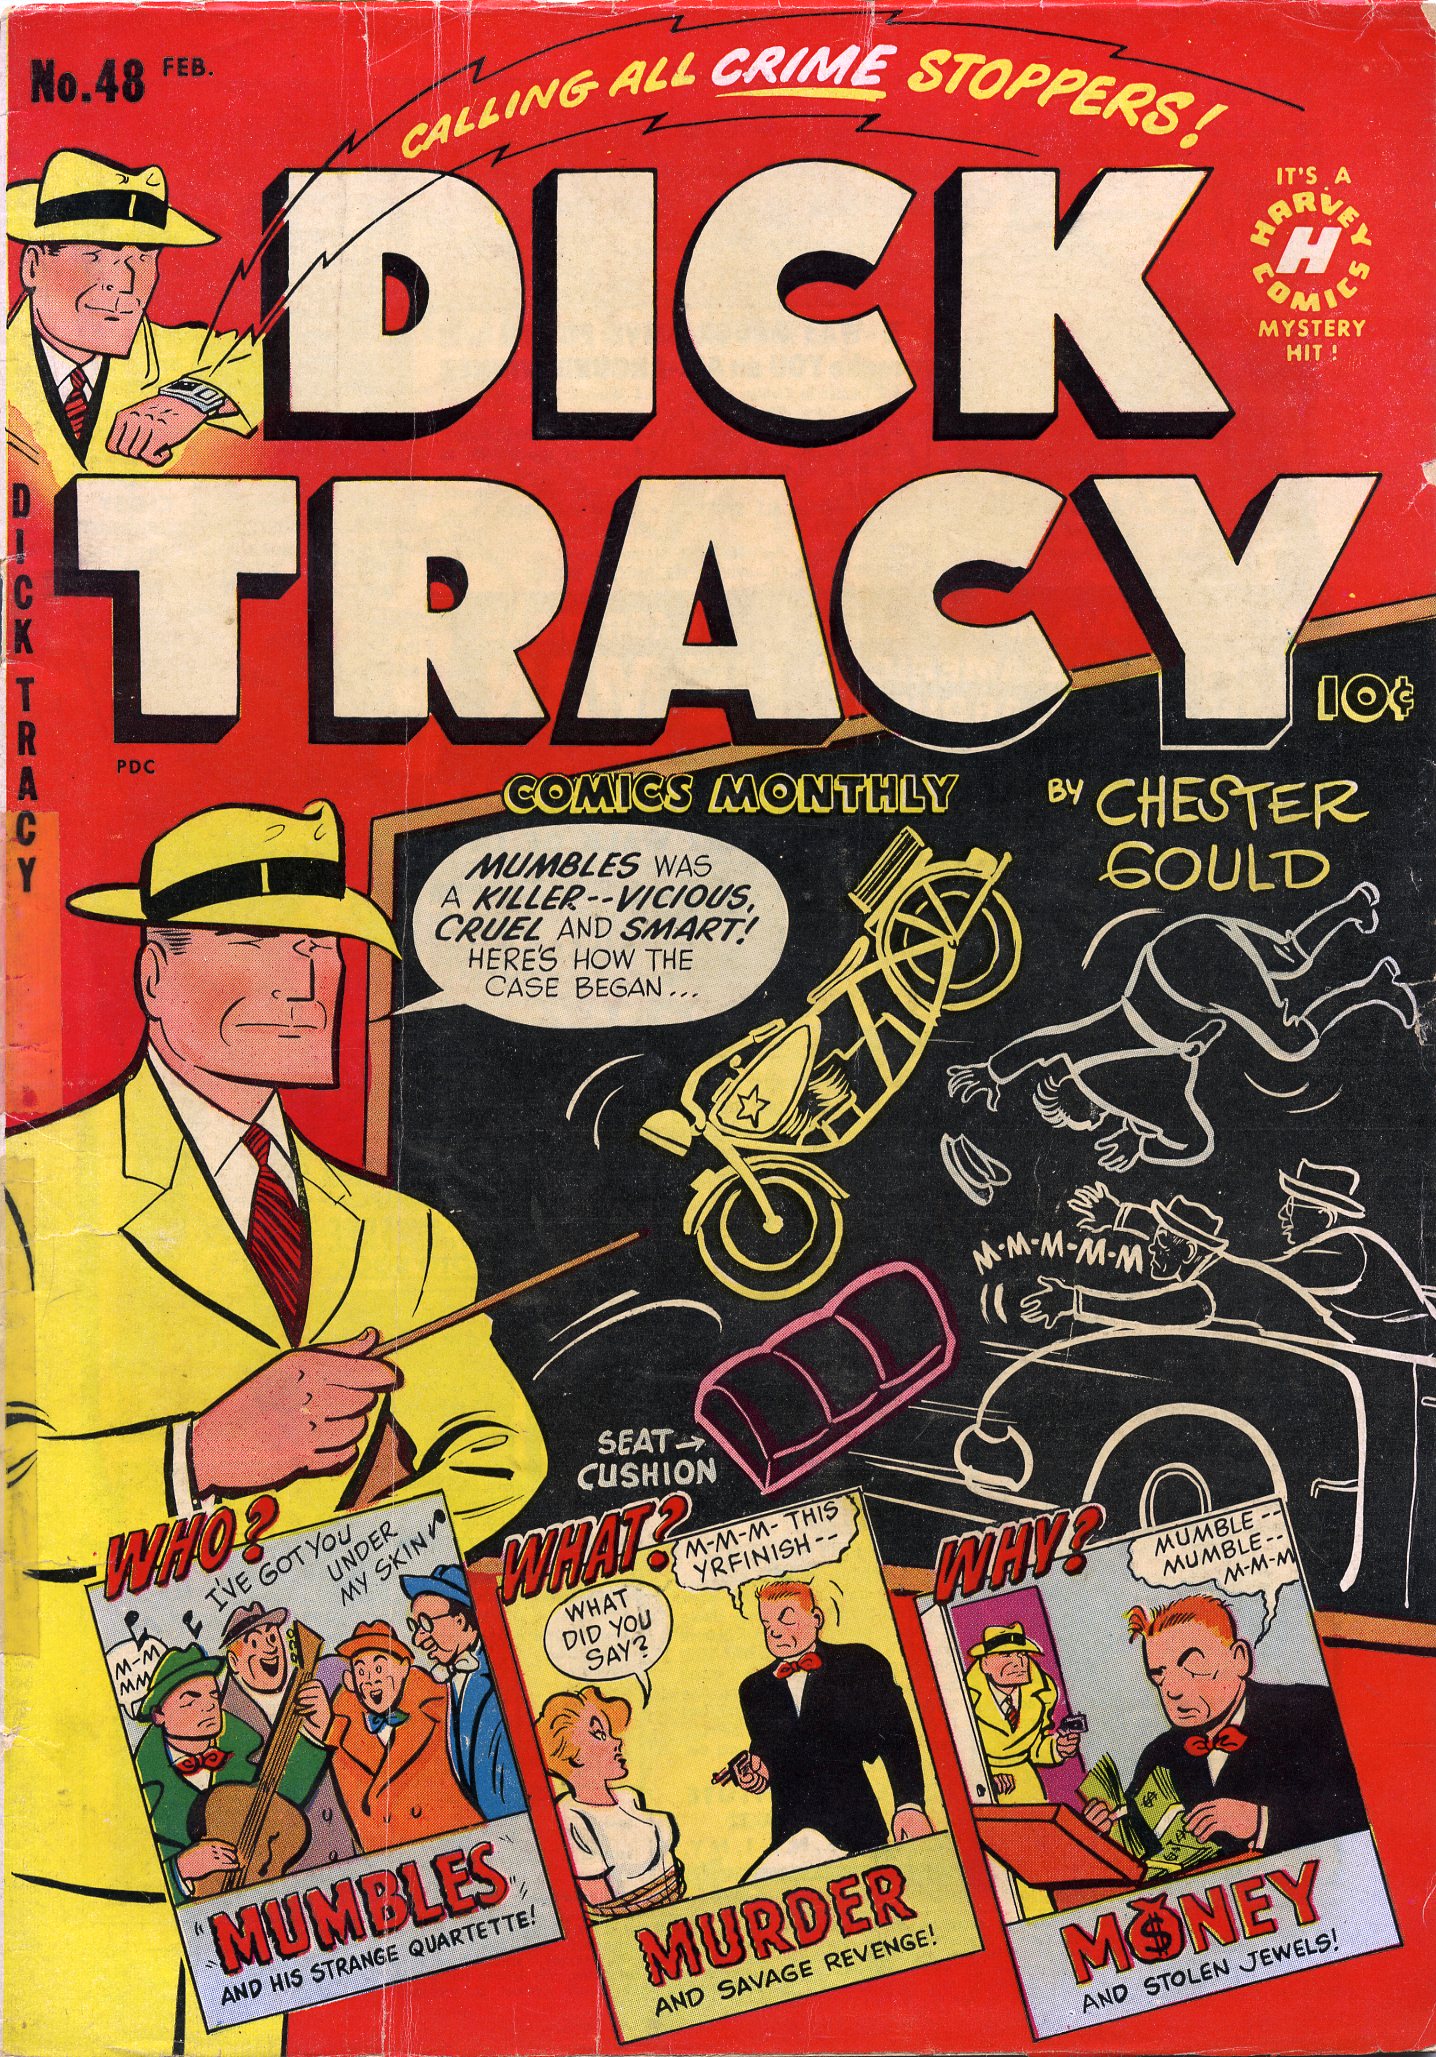 Dick tracy mumbles pictures